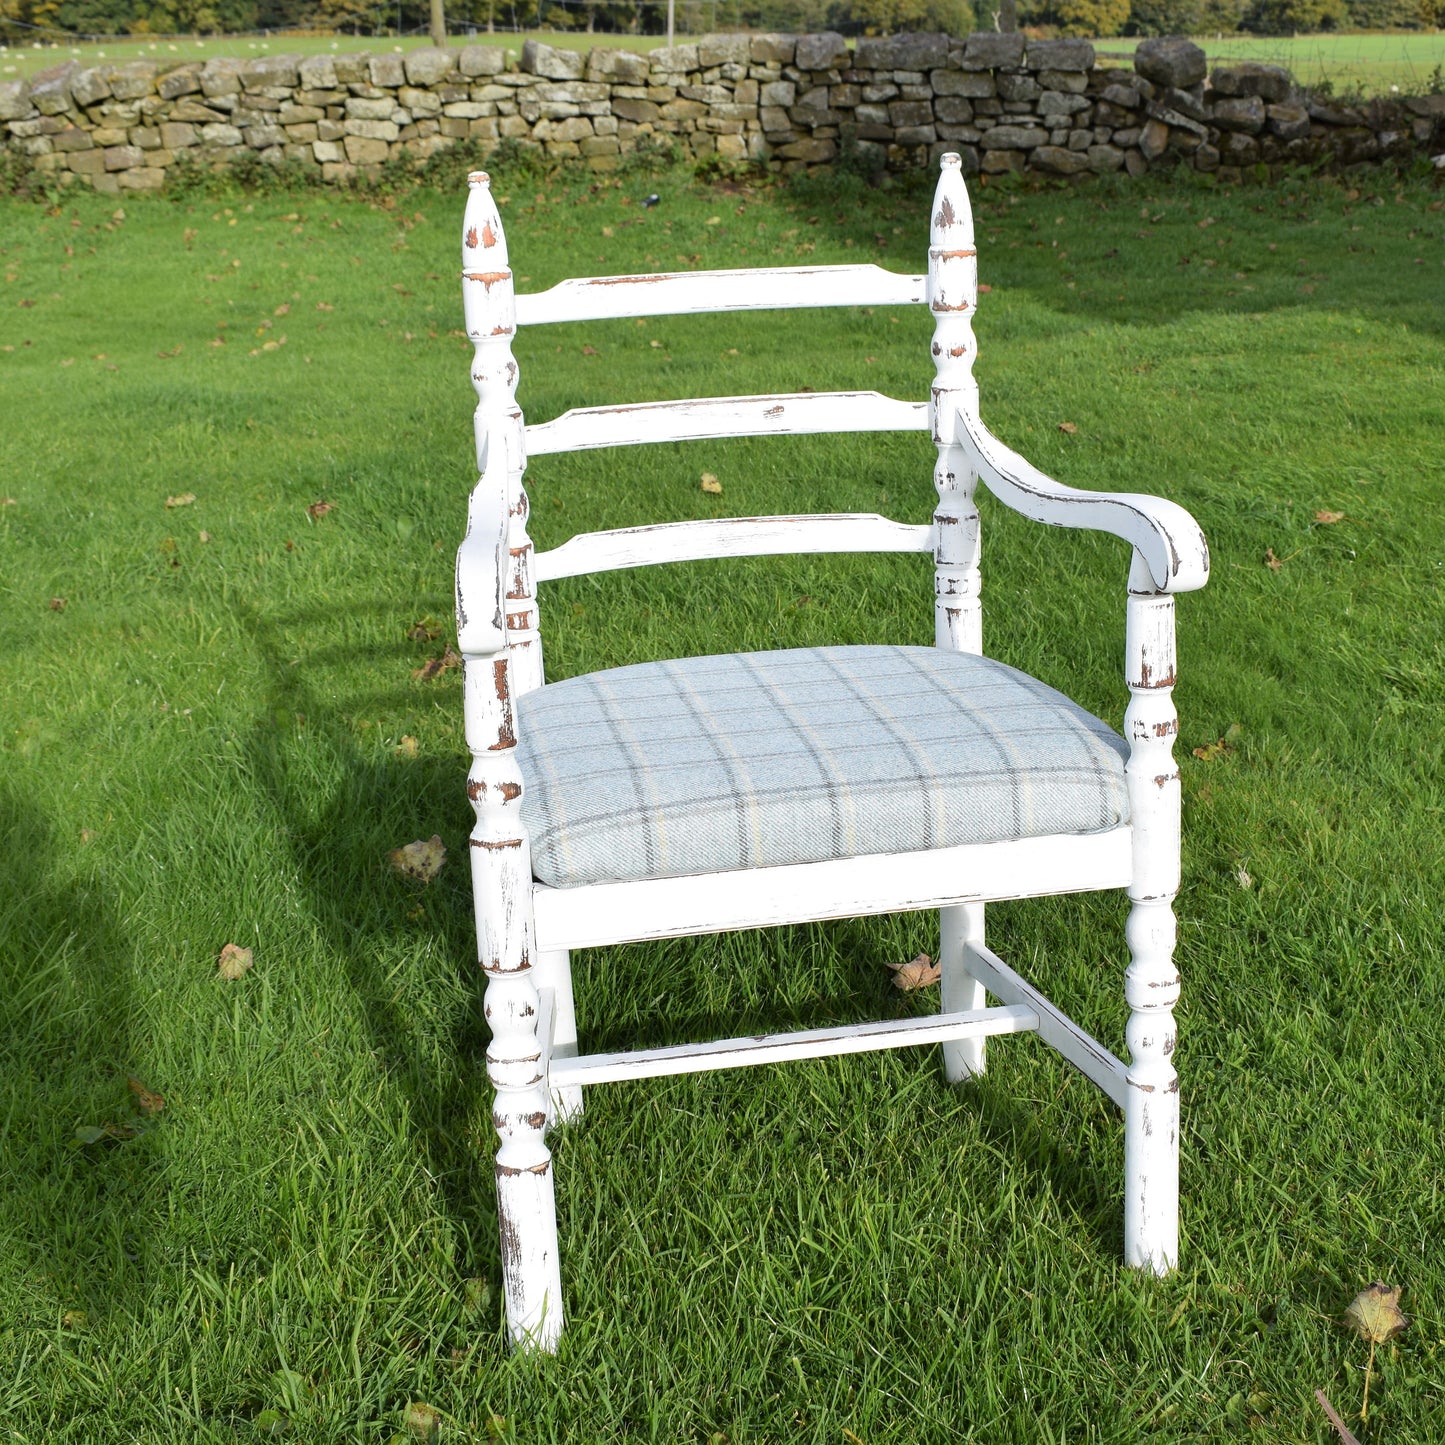 F&B Upcycled Reclaimed Chair - Abraham Moon and Annie Sloan